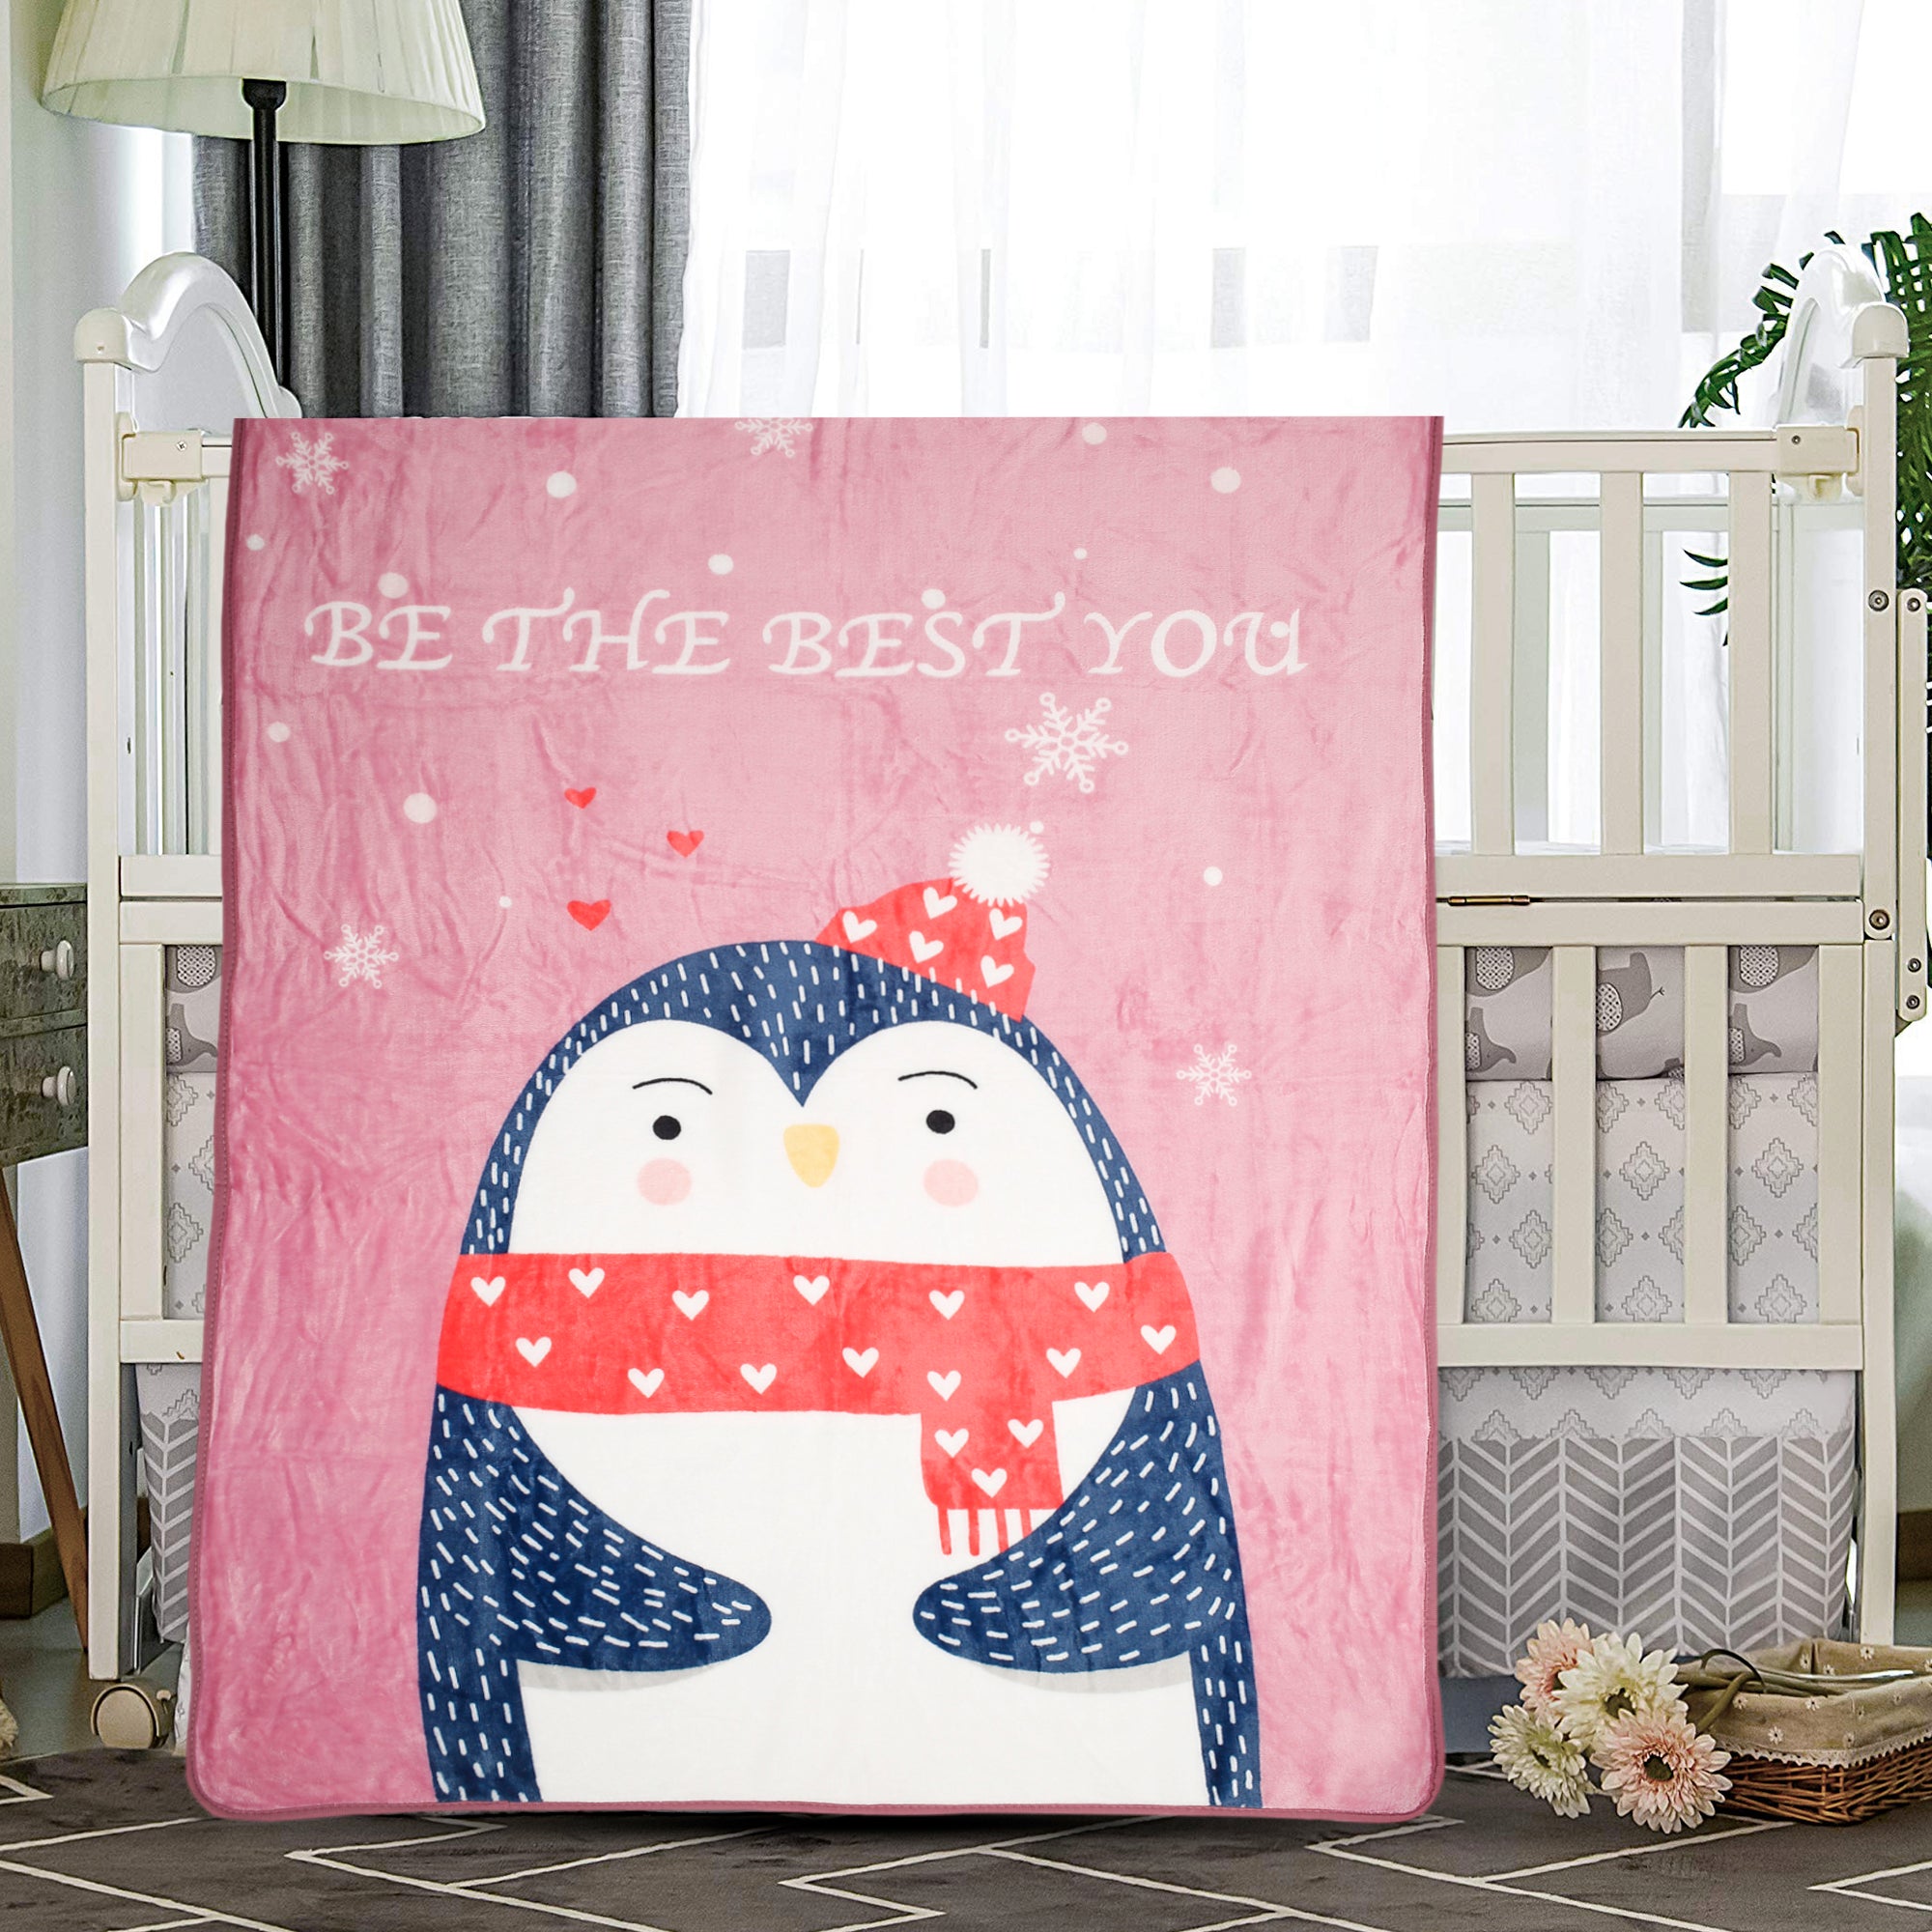 Be The Best You Pink One Ply Blanket - Baby Moo